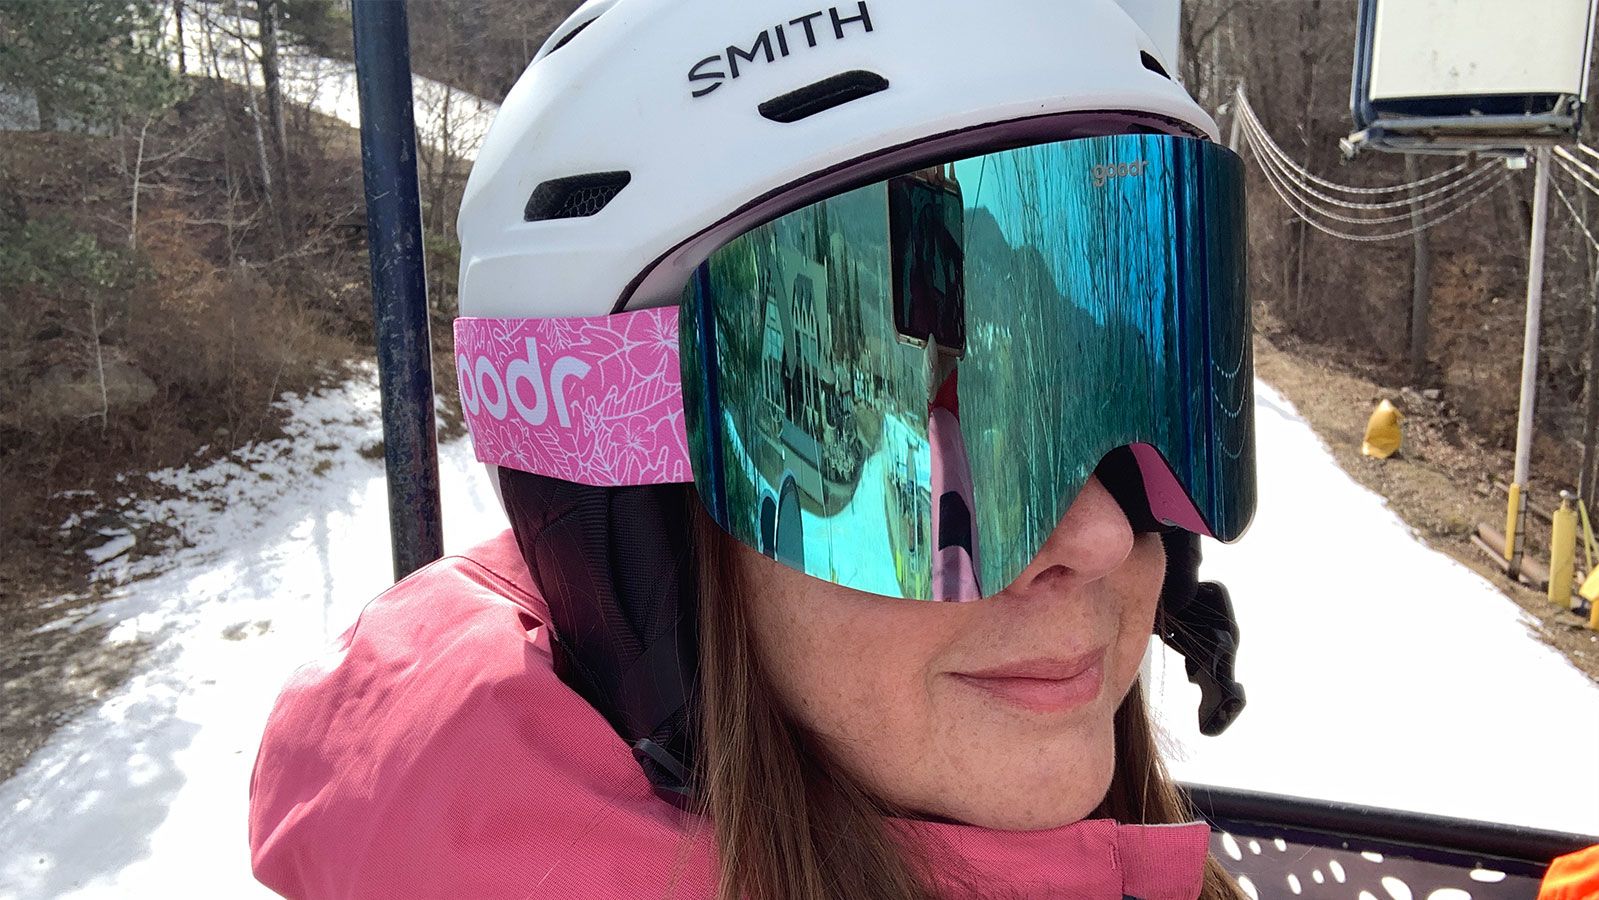 Smith, the new eyewear collection for snow sports - The Pill